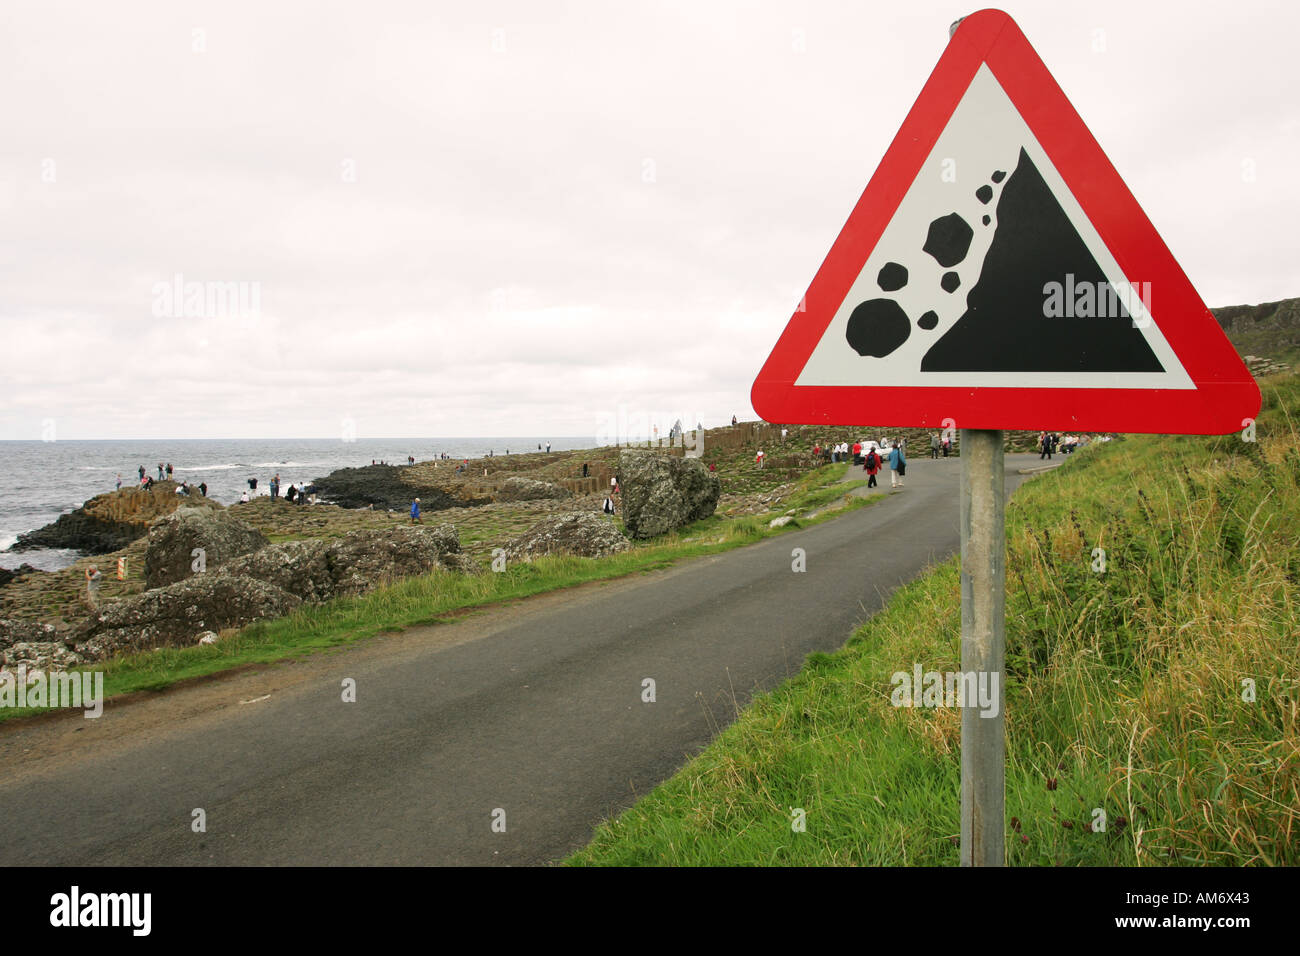 Rock fall warning sign ironically placed near cliffs and huge rocks of the Giants Causeway, Northern Ireland UK GB NI Stock Photo